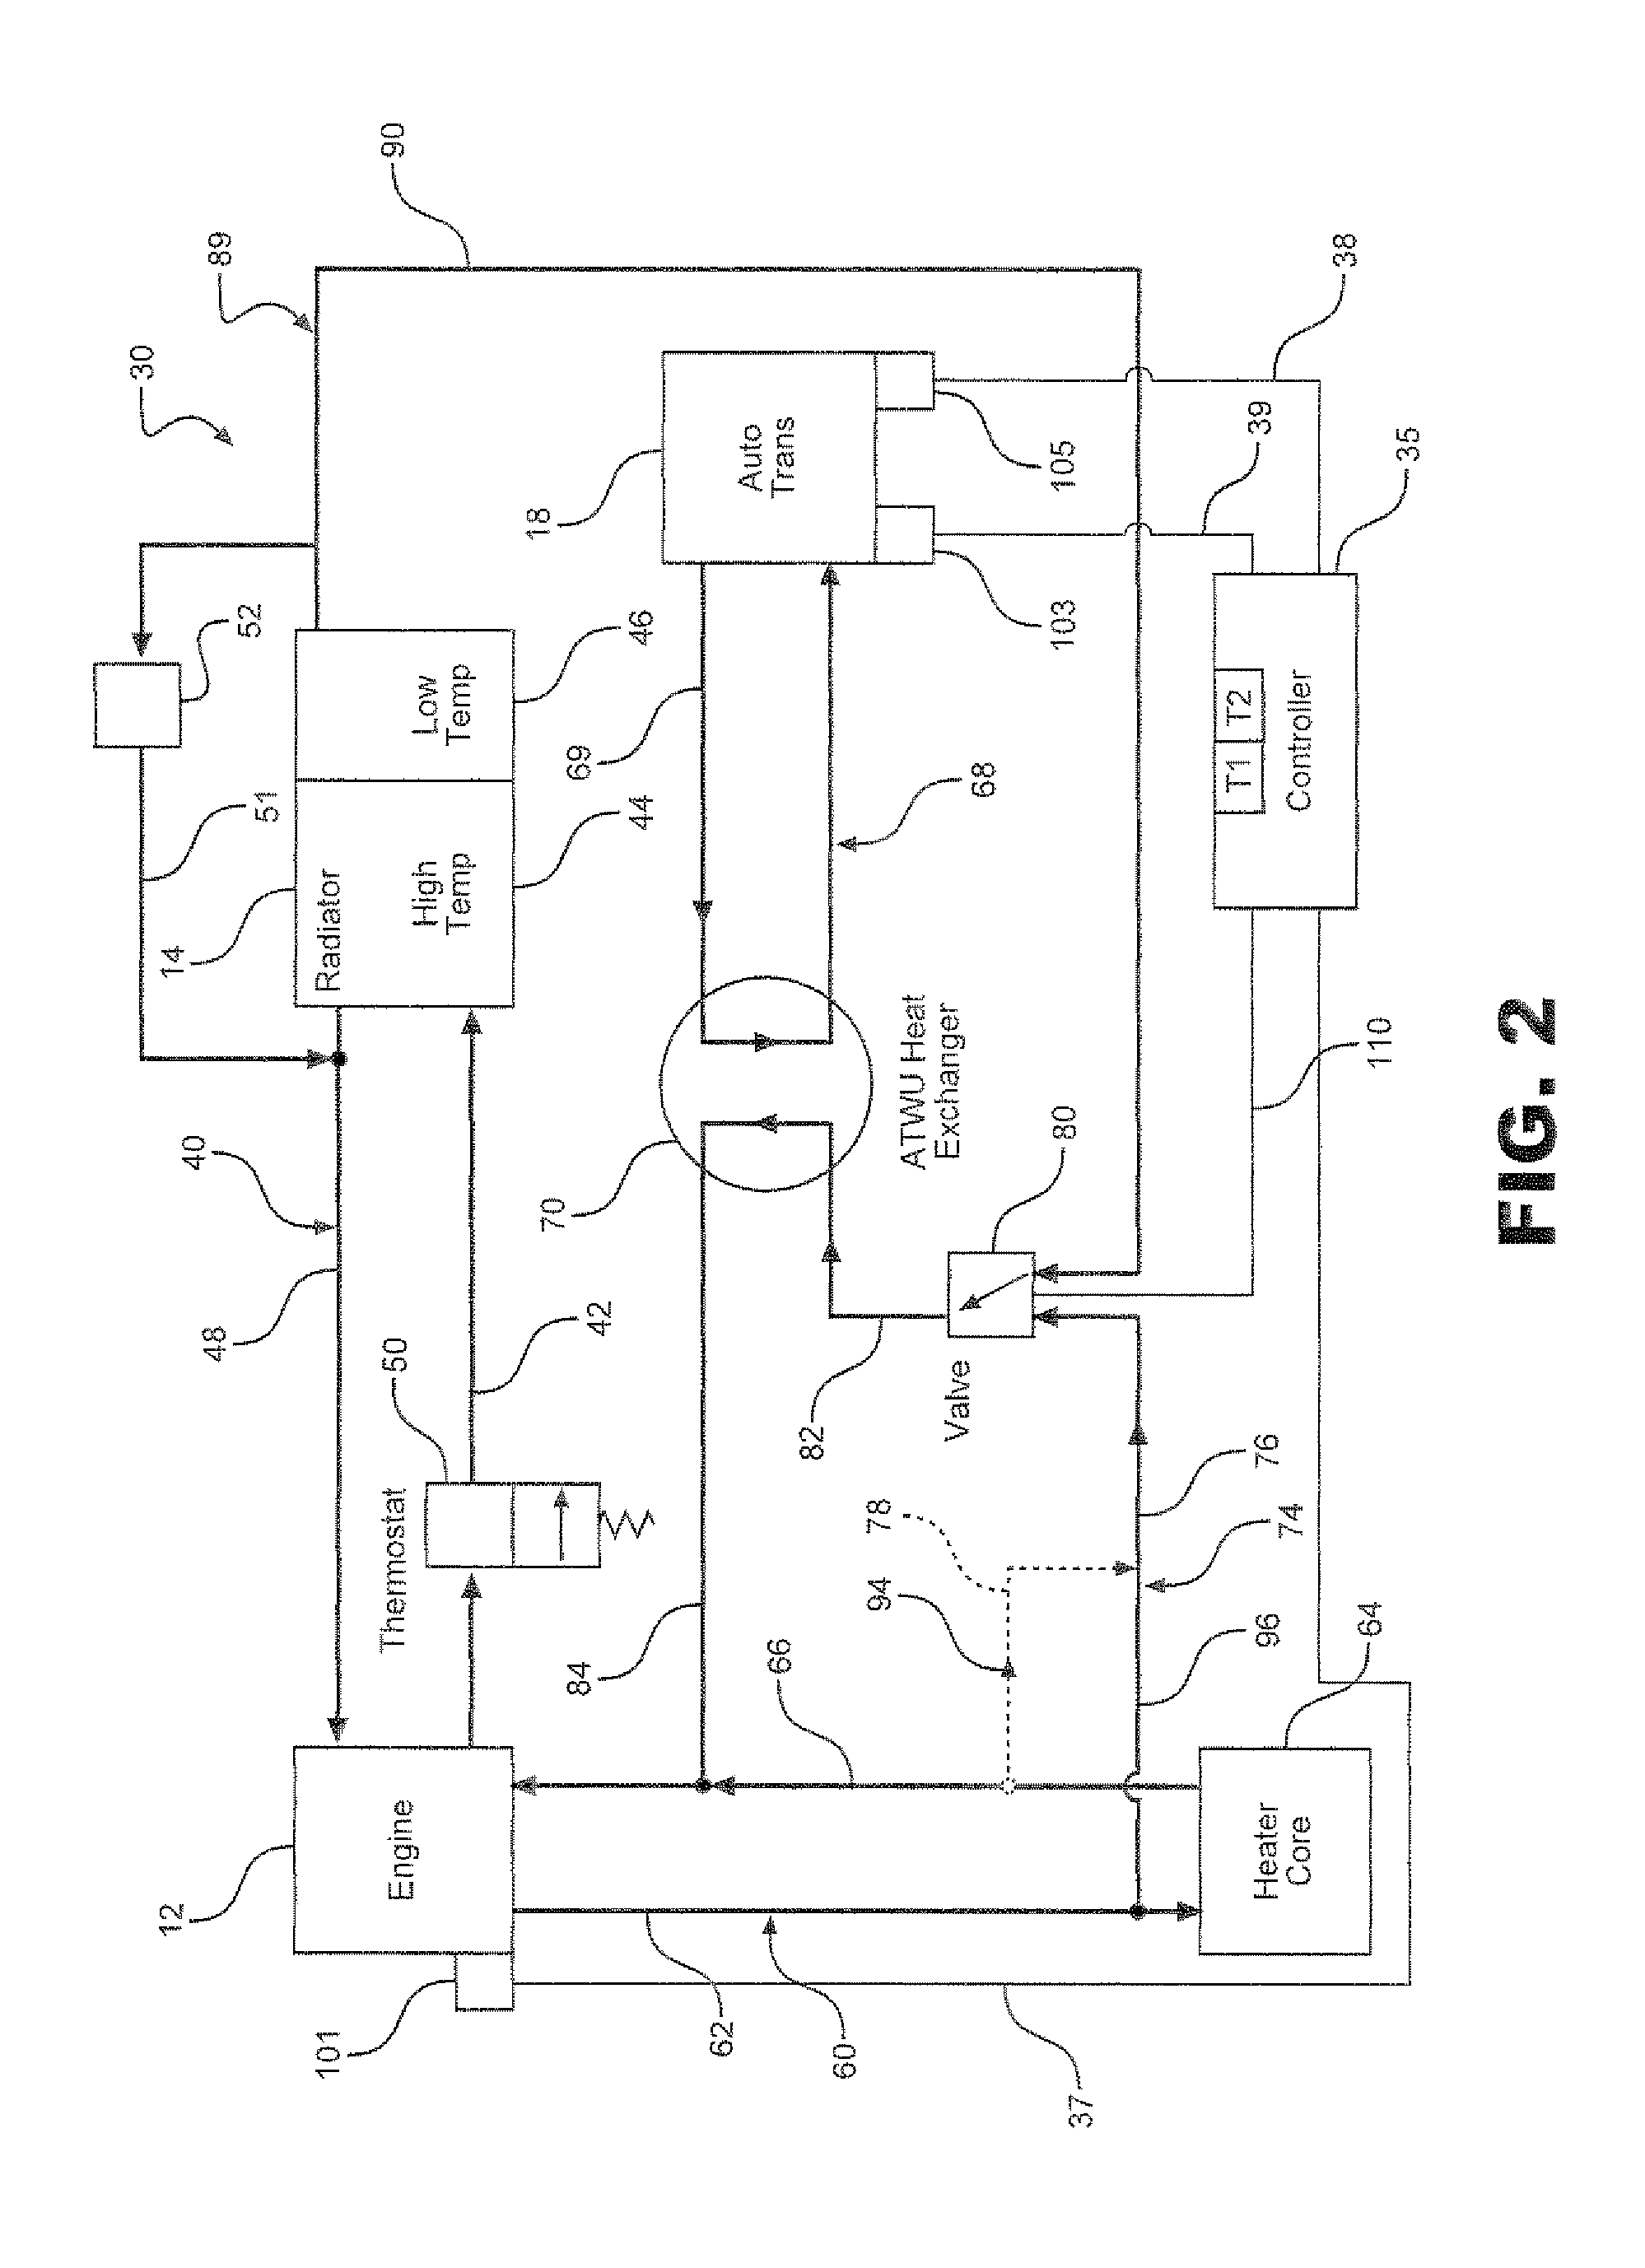 Transmission Fluid Warming and Cooling System